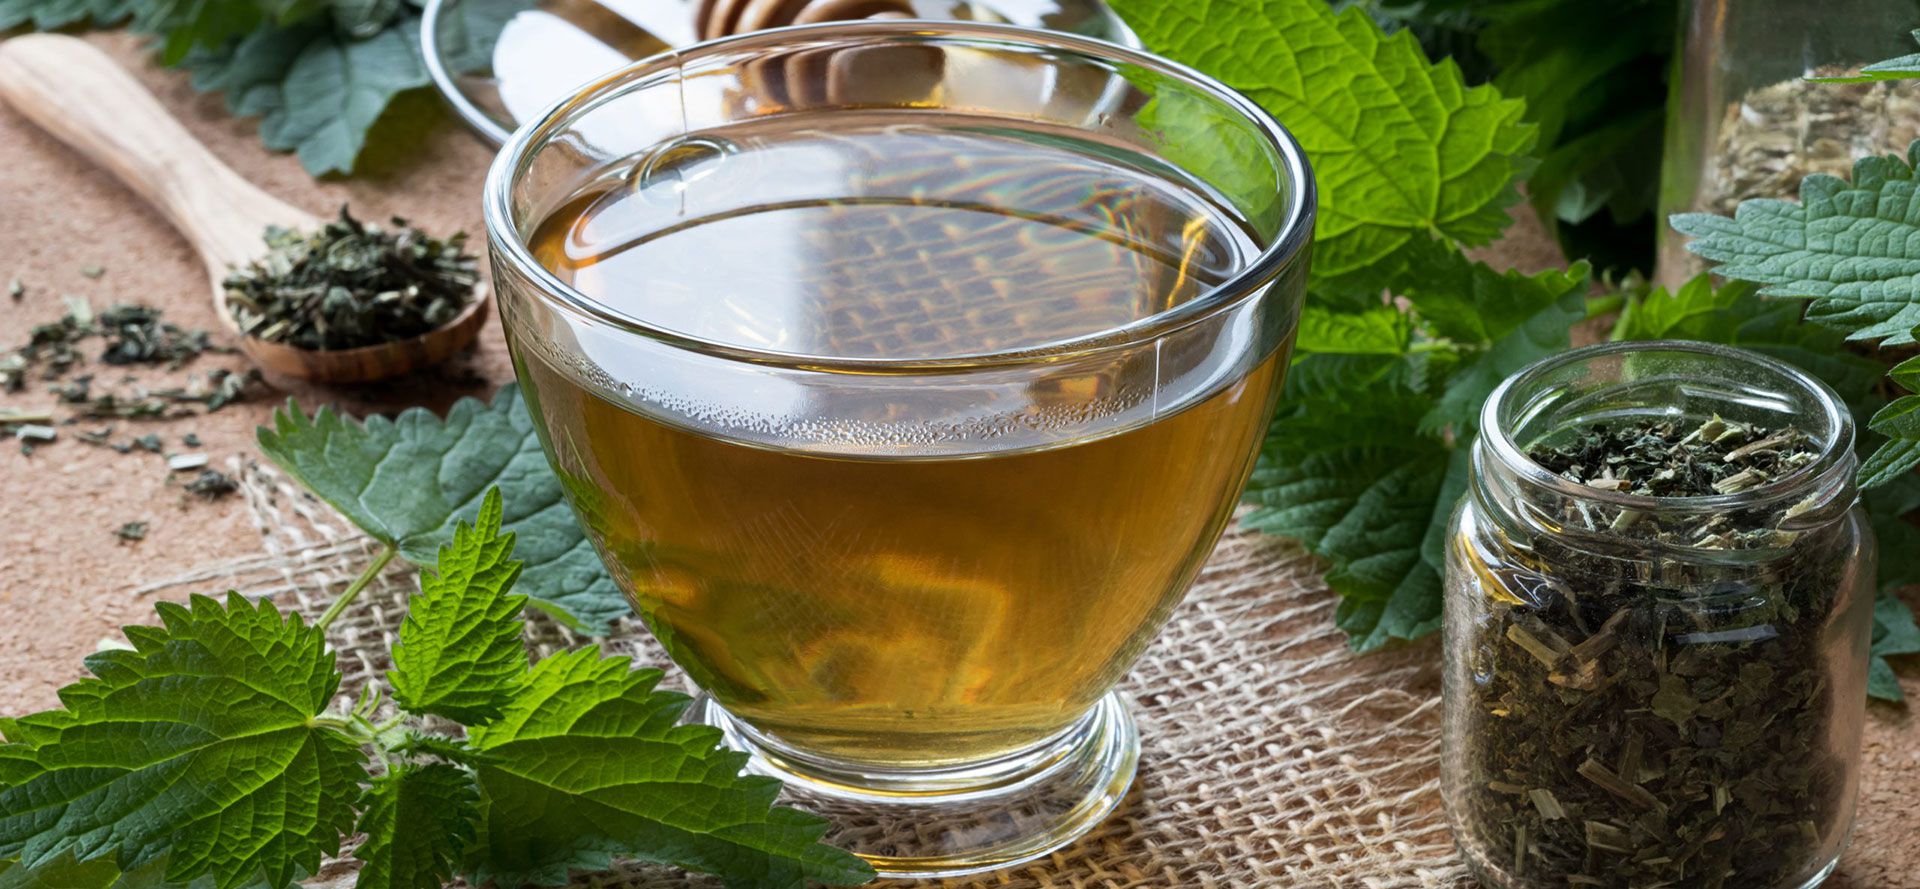 Best Nettle Root Tea For You.